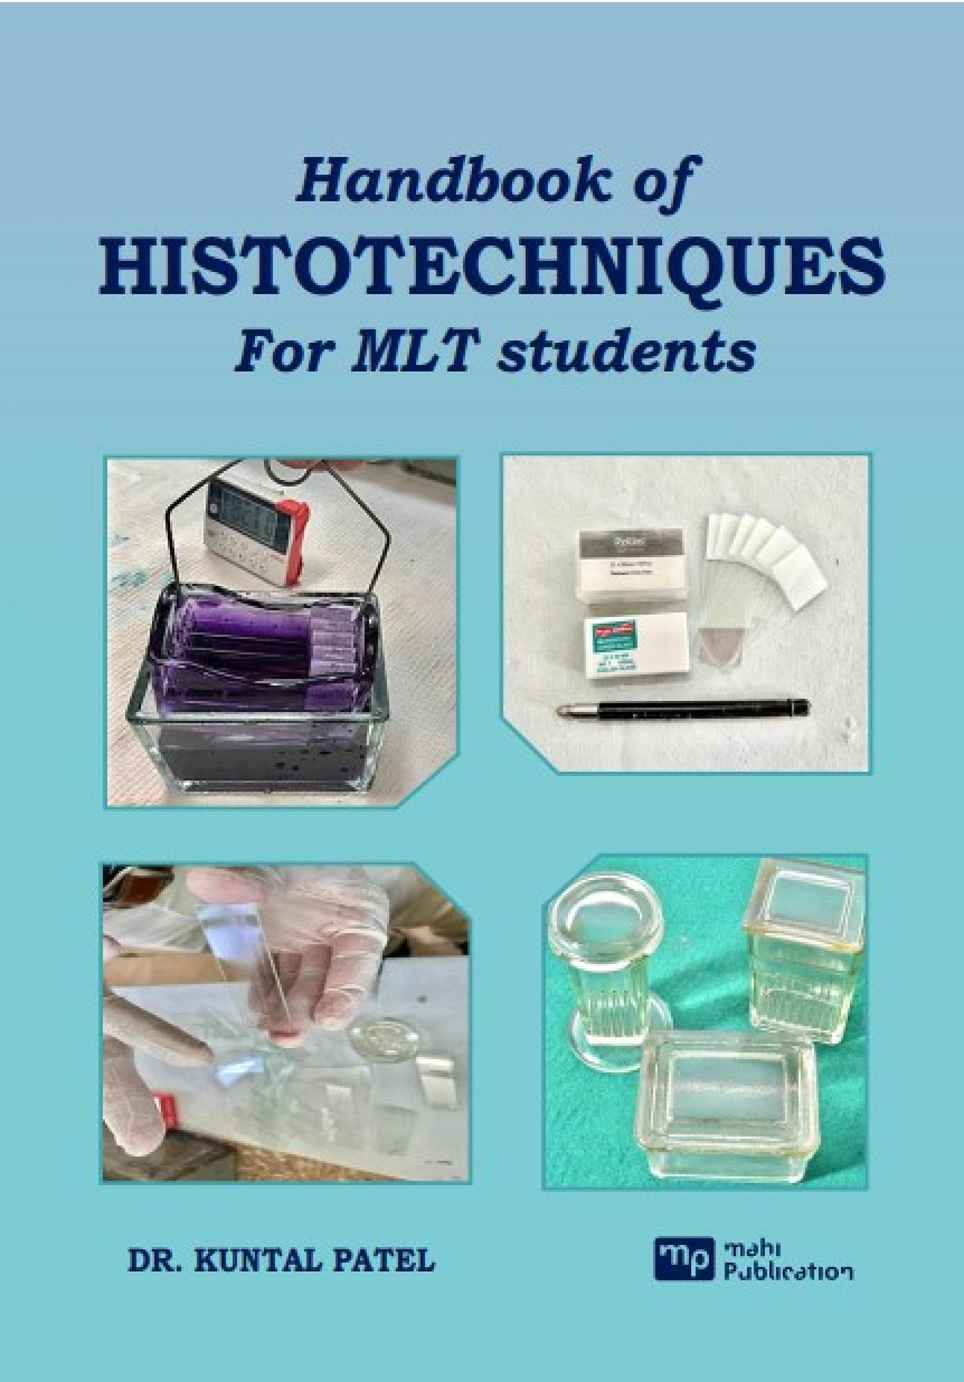 Handbook of HISTOTECHNIQUES For MLT students